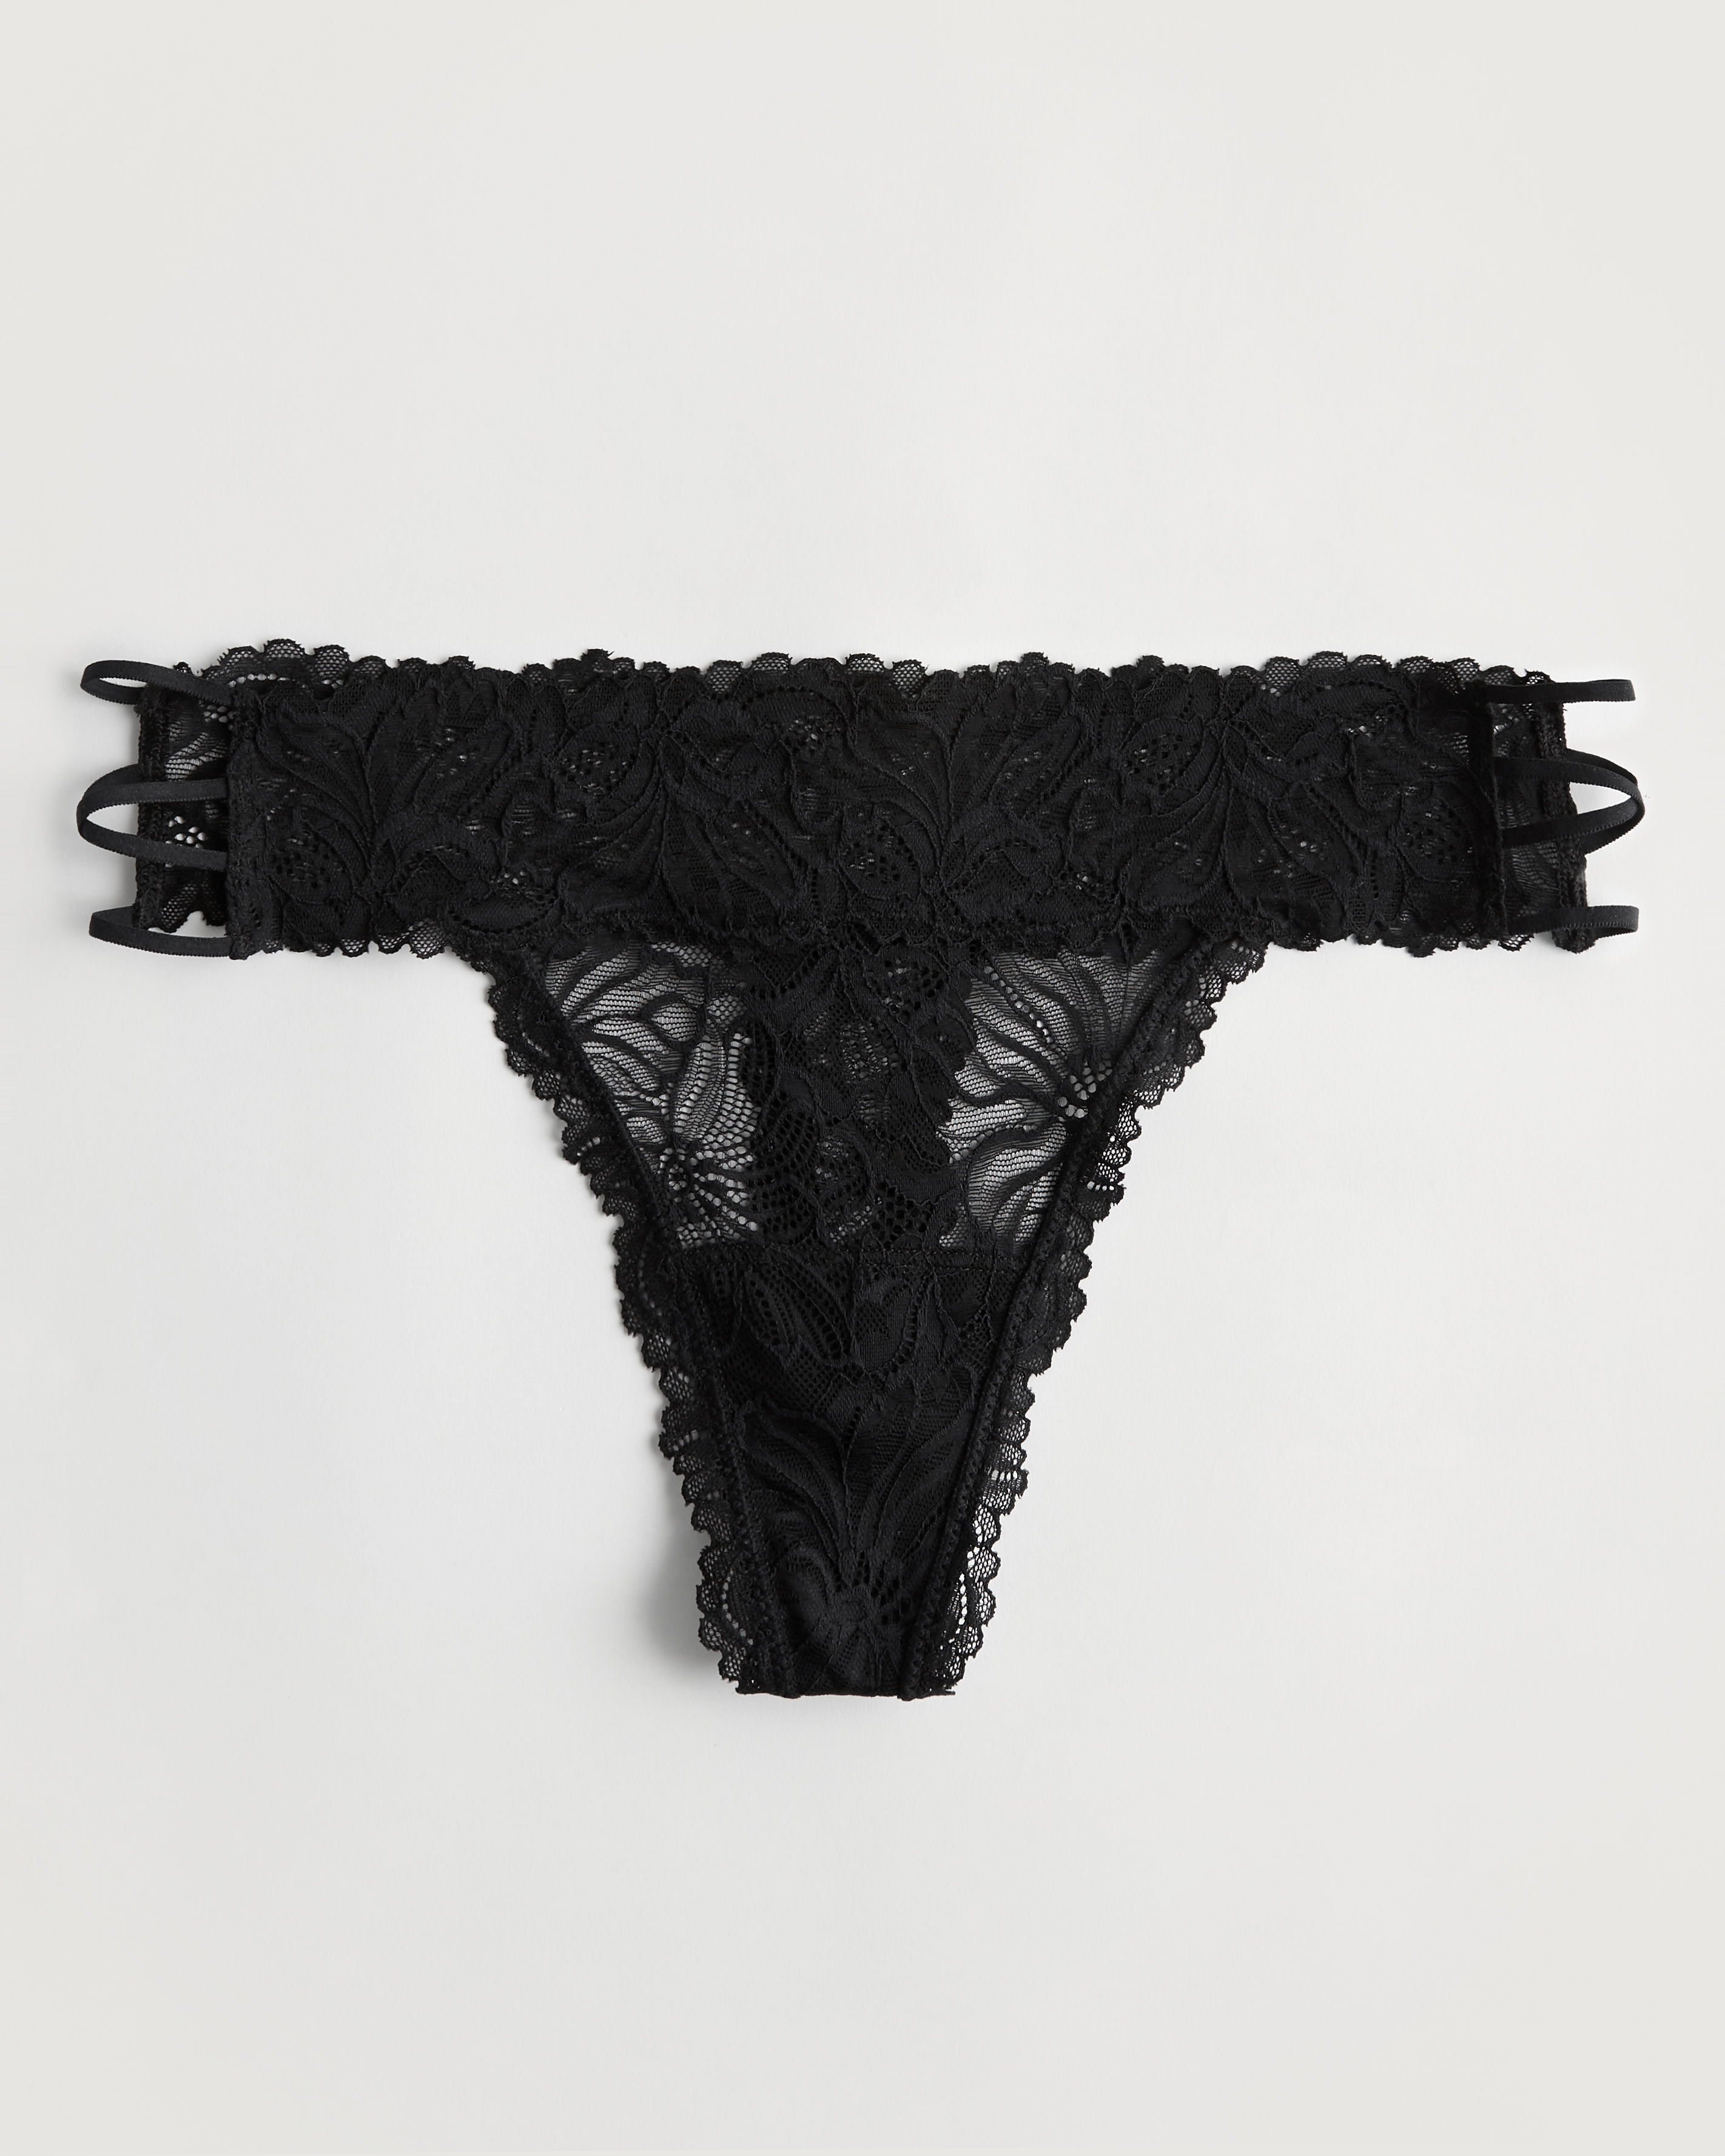 Gilly Hicks, Other, Black Lace Gilly Hicks Underwear